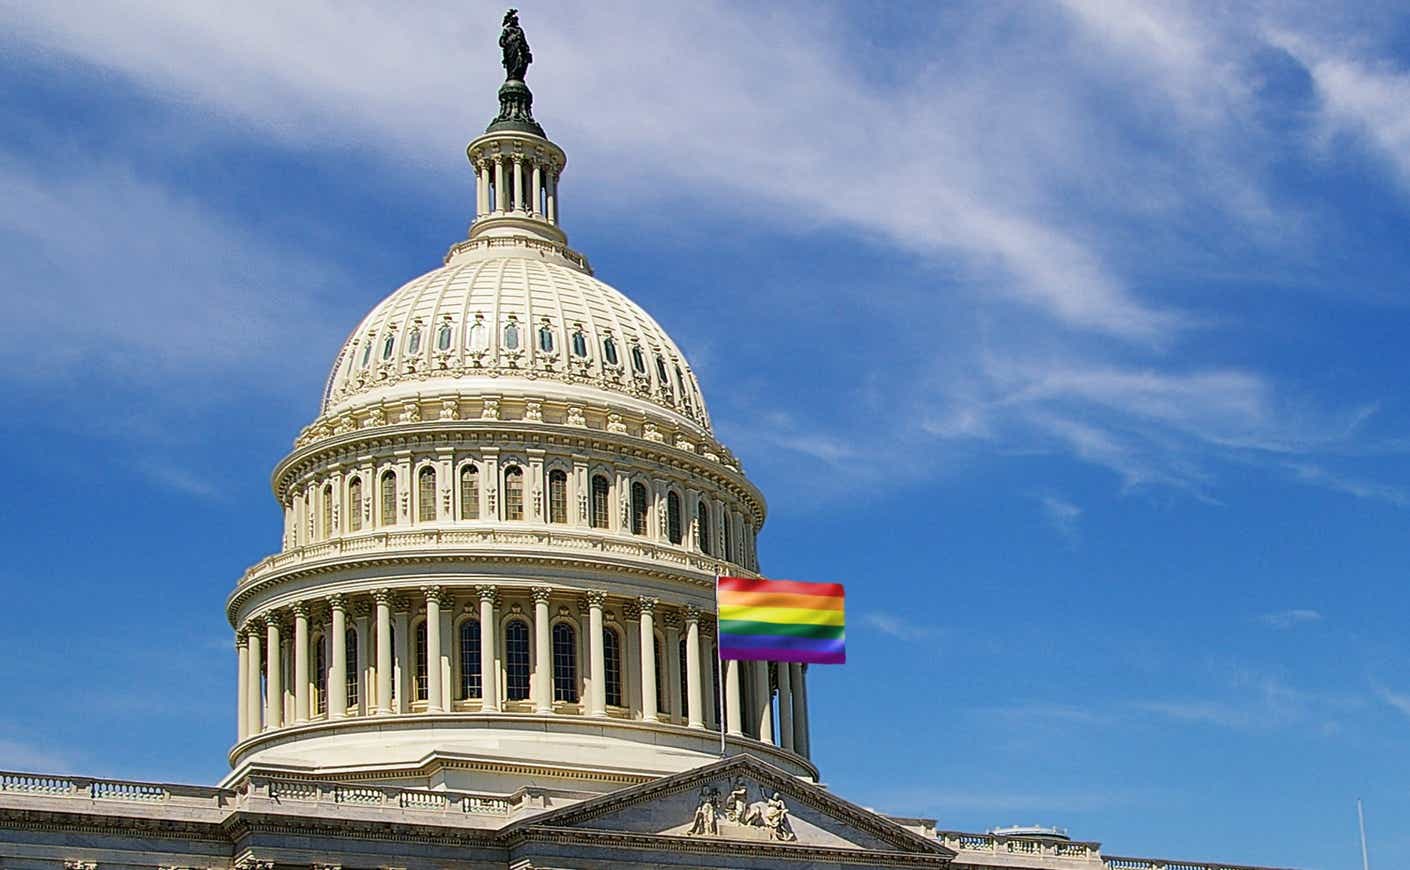 Rainbow flag flying at the U.S. Capitol